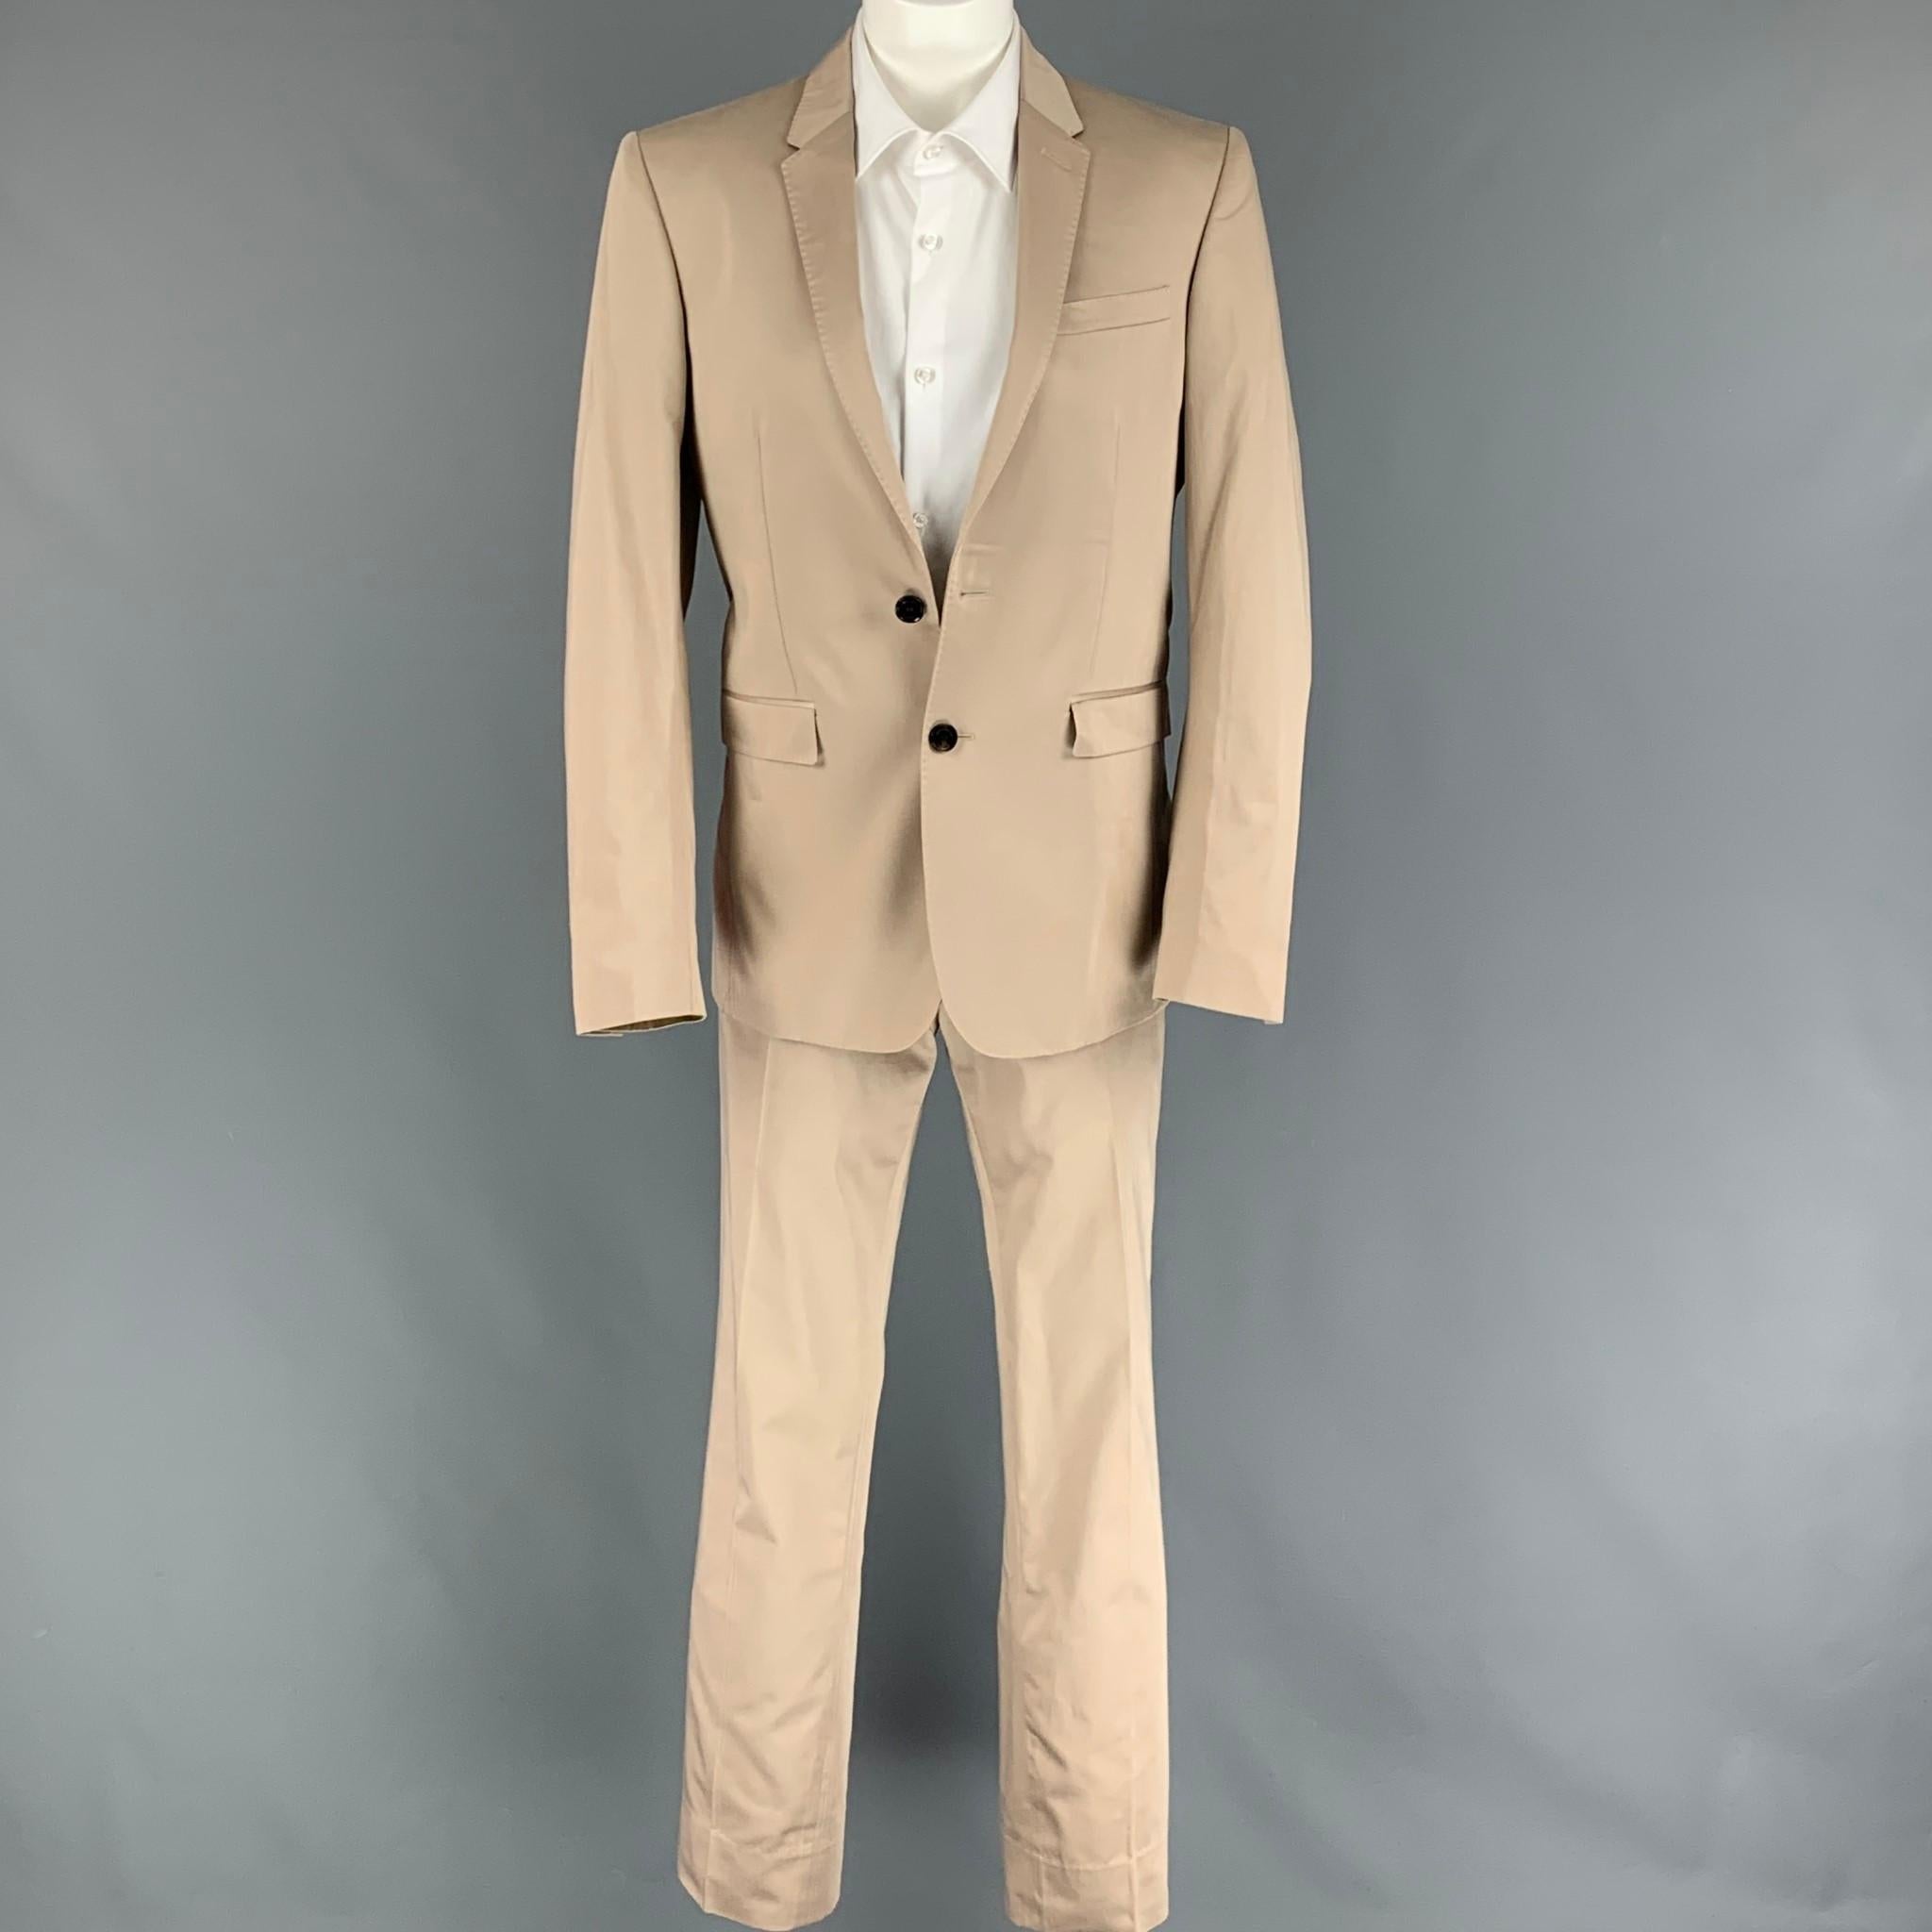 BURBERRY LONDON suit comes in a beige cotton with a full plaid liner and includes a single breasted, double button sport coat with a notch lapel and matching flat front trousers. Made in Portugal.

New With Tags.
Marked: 46R
Original Retail Price: